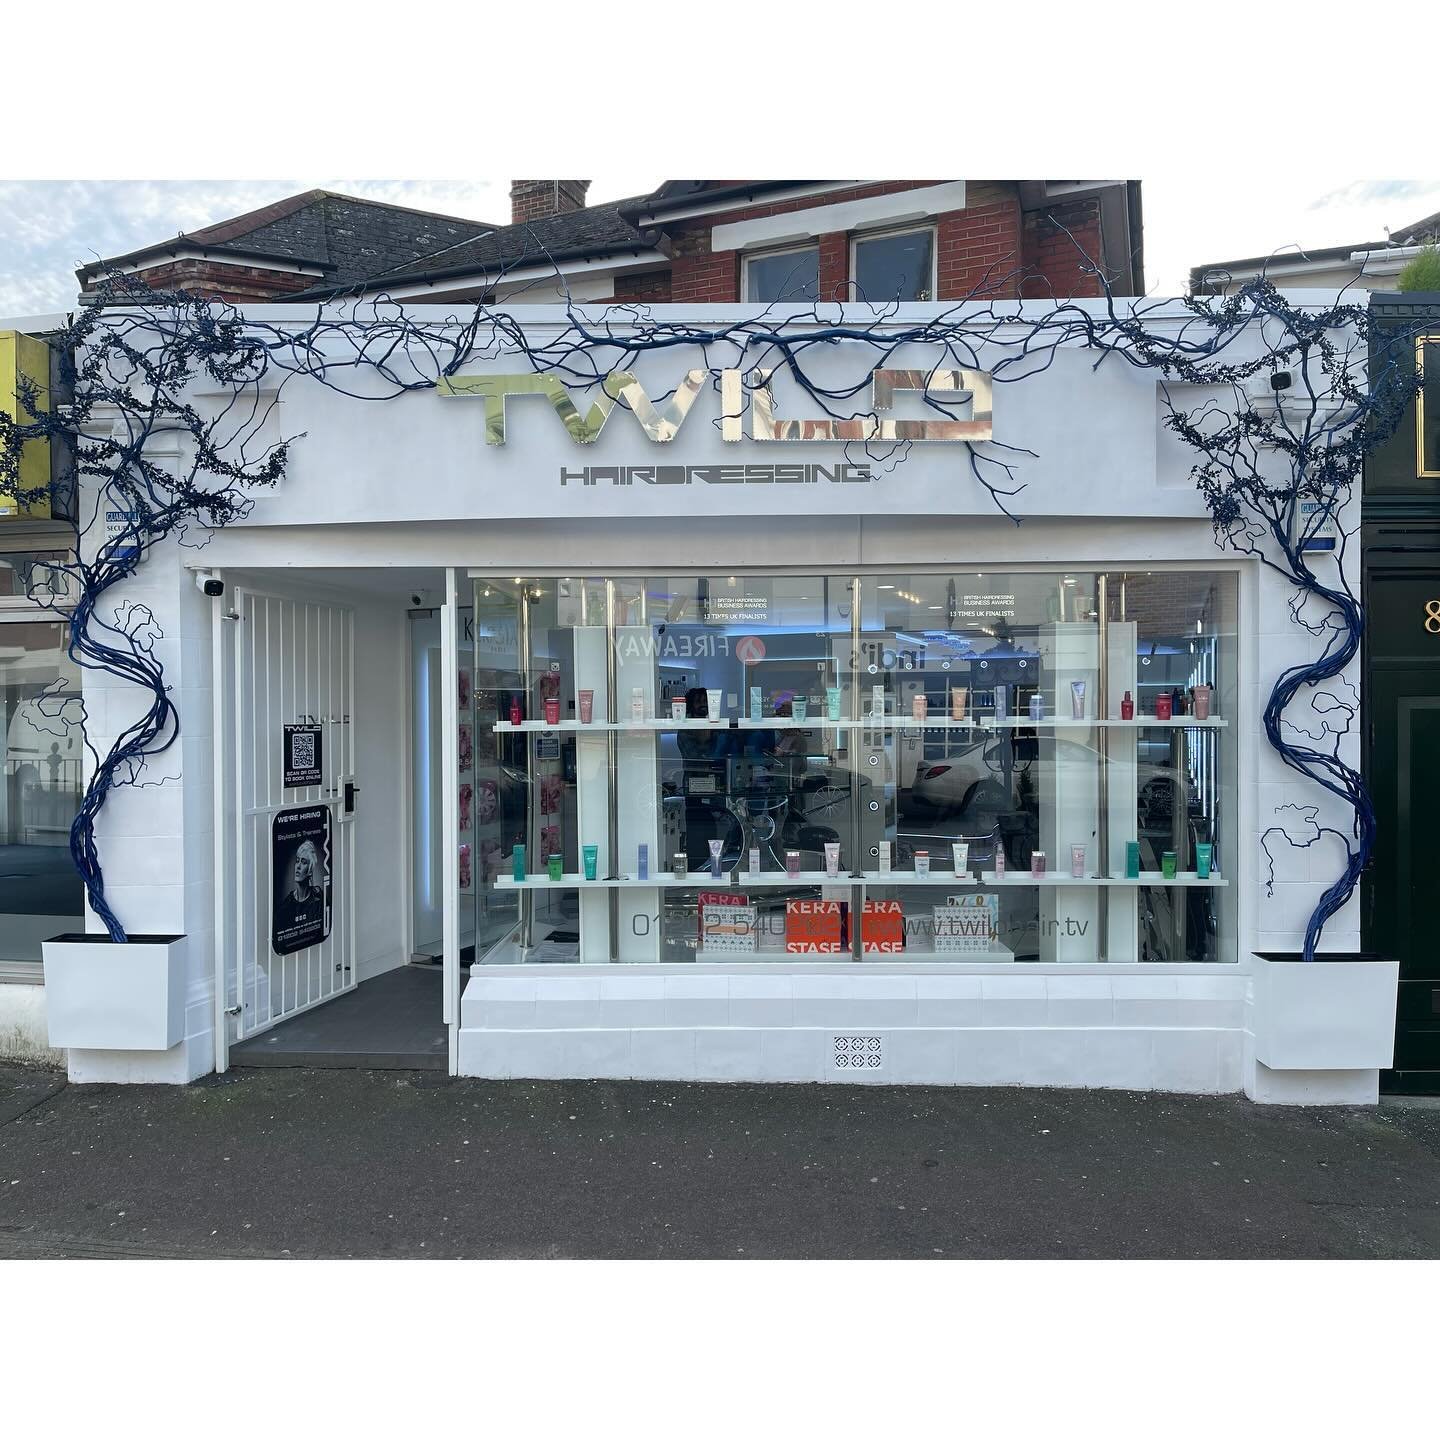 W i n t e r  B l u e s | Something so wavy &amp; navy has never looked so good ♡︎

Made with 𝓁ℴ𝓋ℯ by the unsung hero 🙌🏽

#NavyConcept  #VisualConcept  #WinterDisplay  #RoyalBlue  #Shopfront  #SeasonalStatement  #TwiloStyle